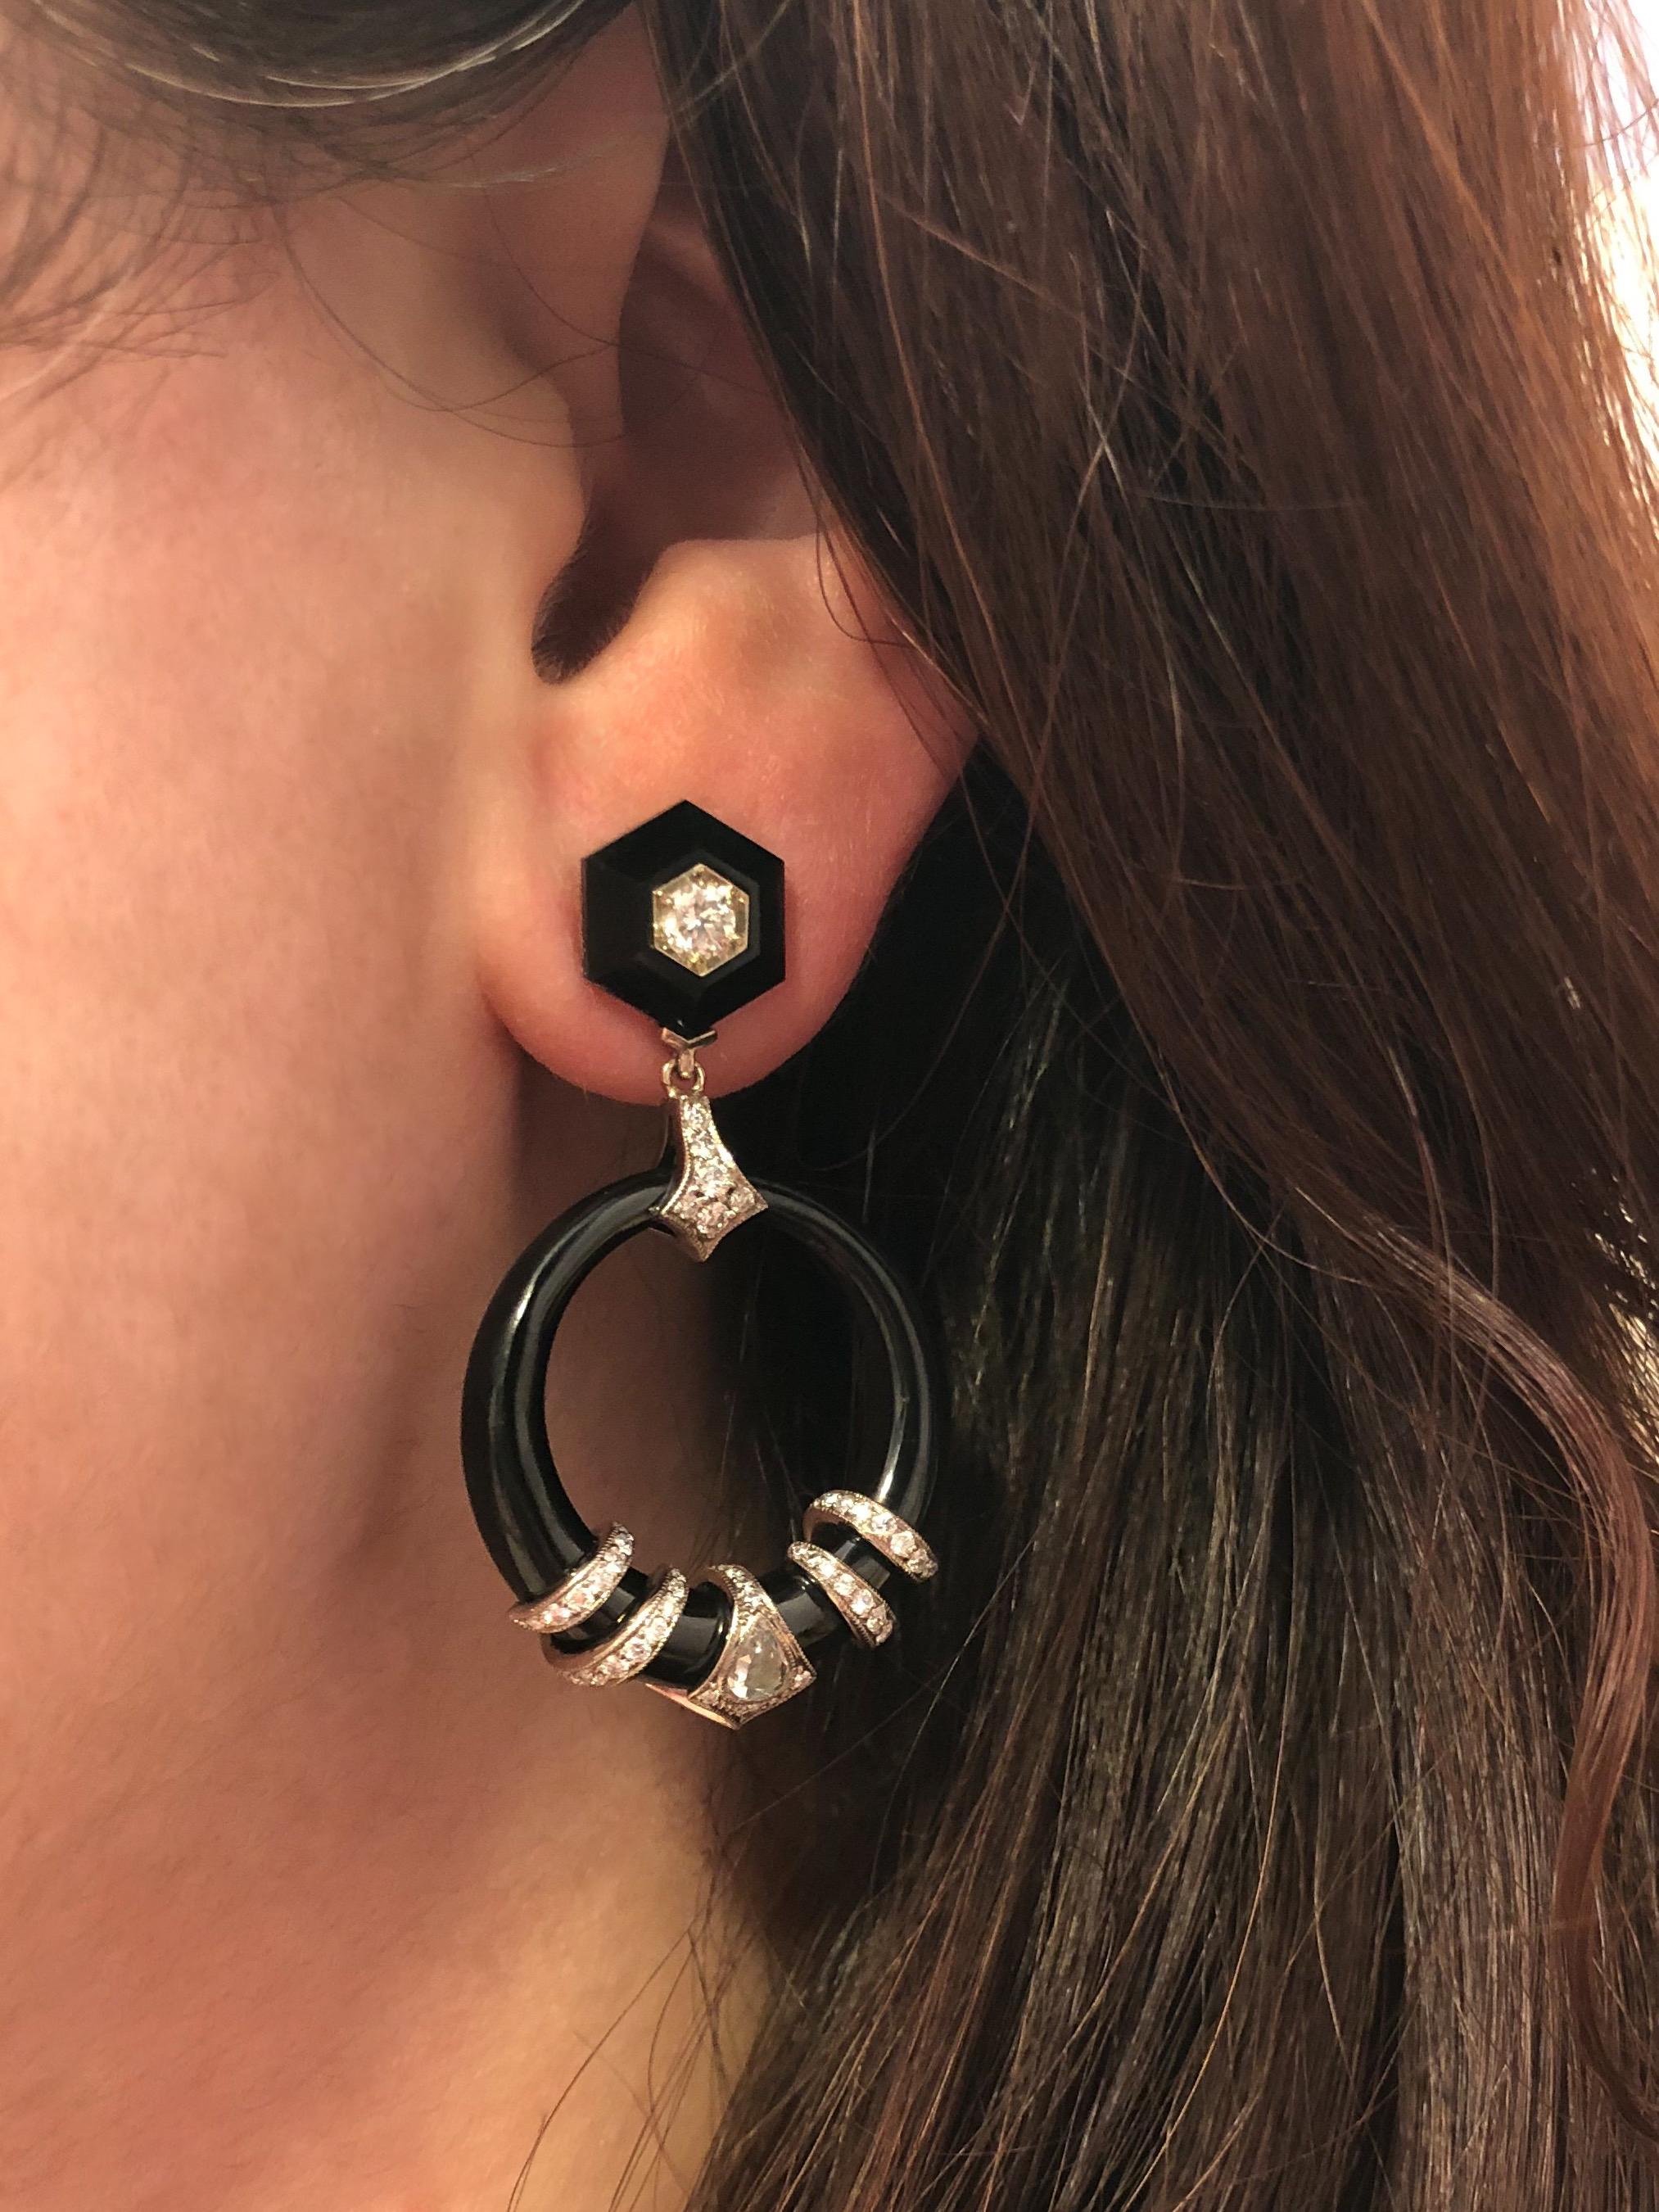 Fred Leighton Black Jade and Diamond Coil Doorknocker Earrings

Coil motifs set with pear shape rose cut diamonds totaling approximately 0.24 carat accented with round diamonds totaling approximately 1.20 carats encircle black jade discs suspended